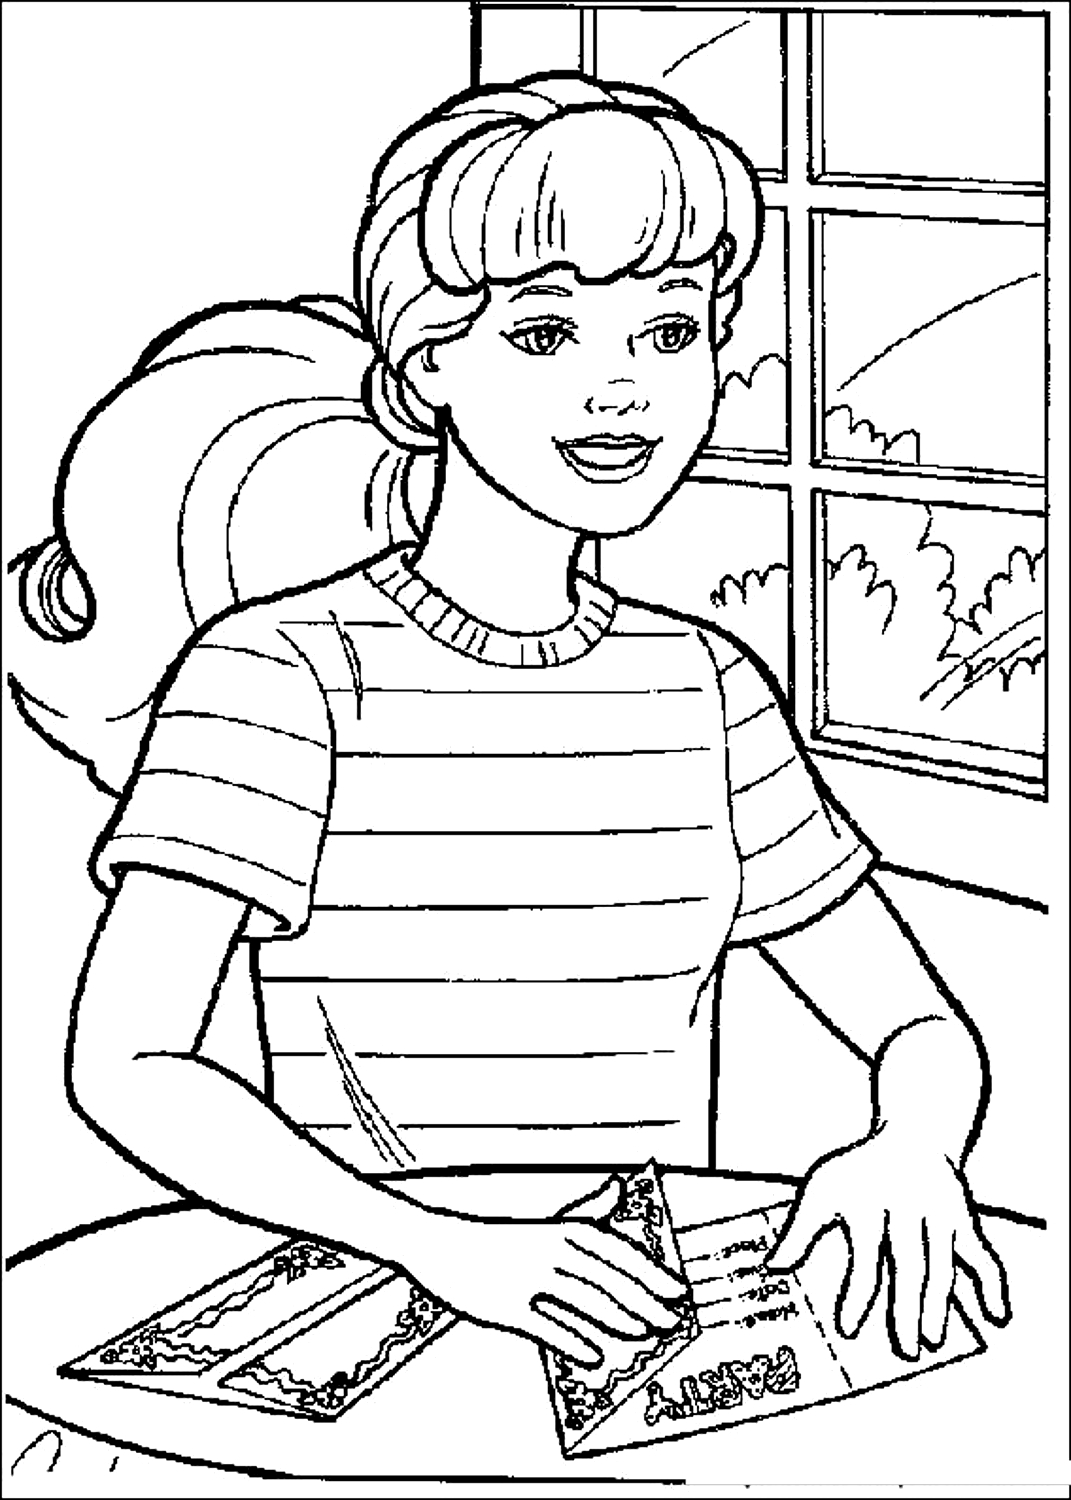 Barbie 11 Barbie coloring page to print and coloring